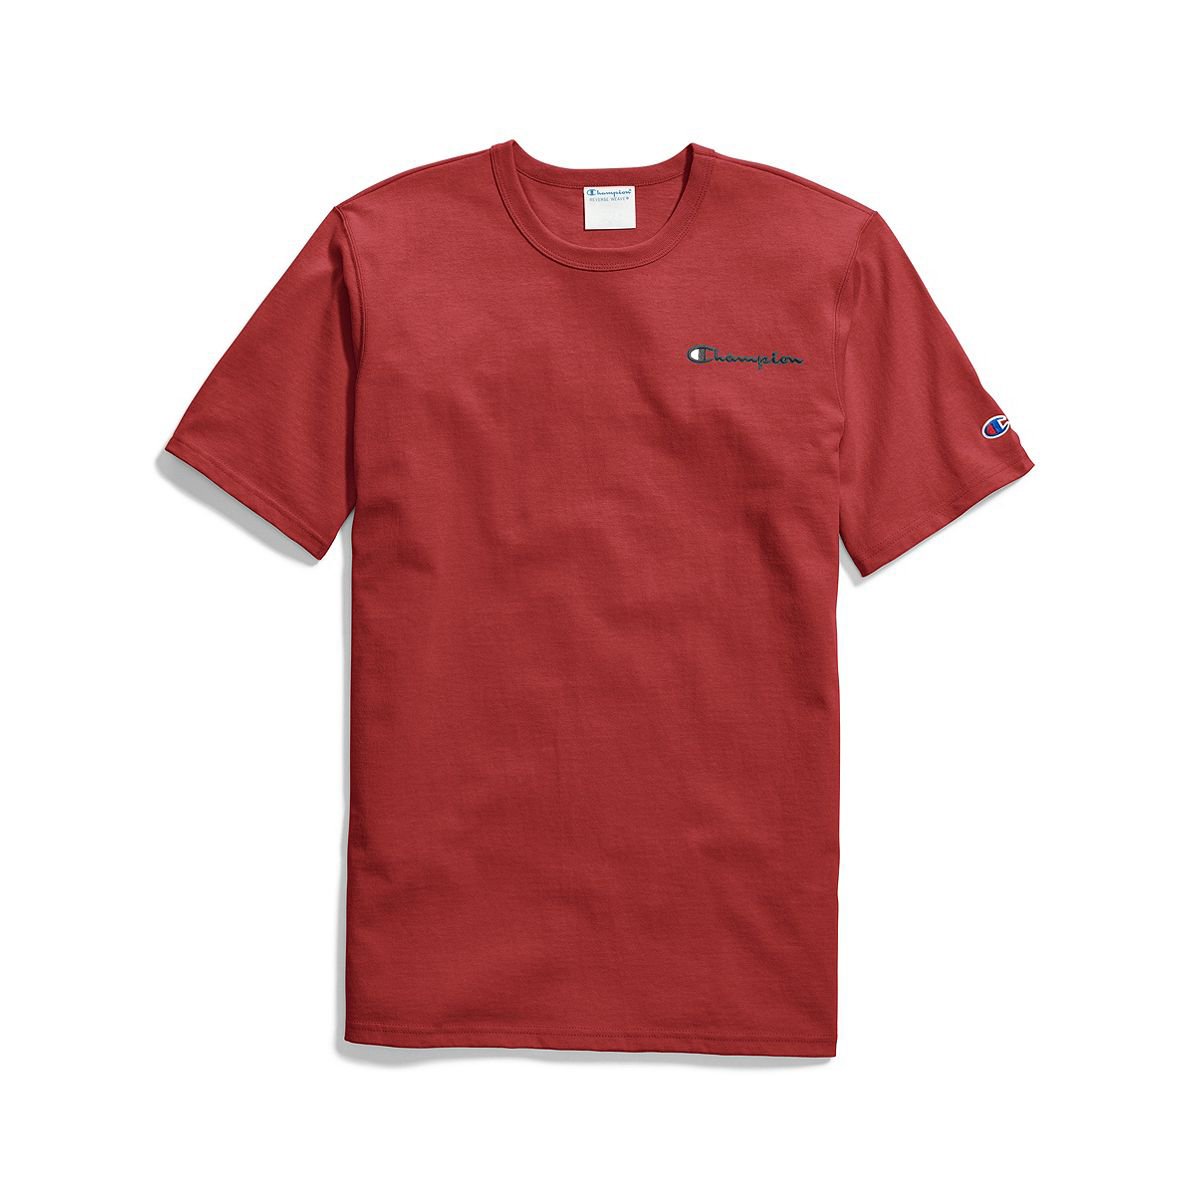 Champion Heritage Tee Elevated Graphics Script Team Red Scarlet Men GT19-Y06819-2WC - T-SHIRTS - Canada